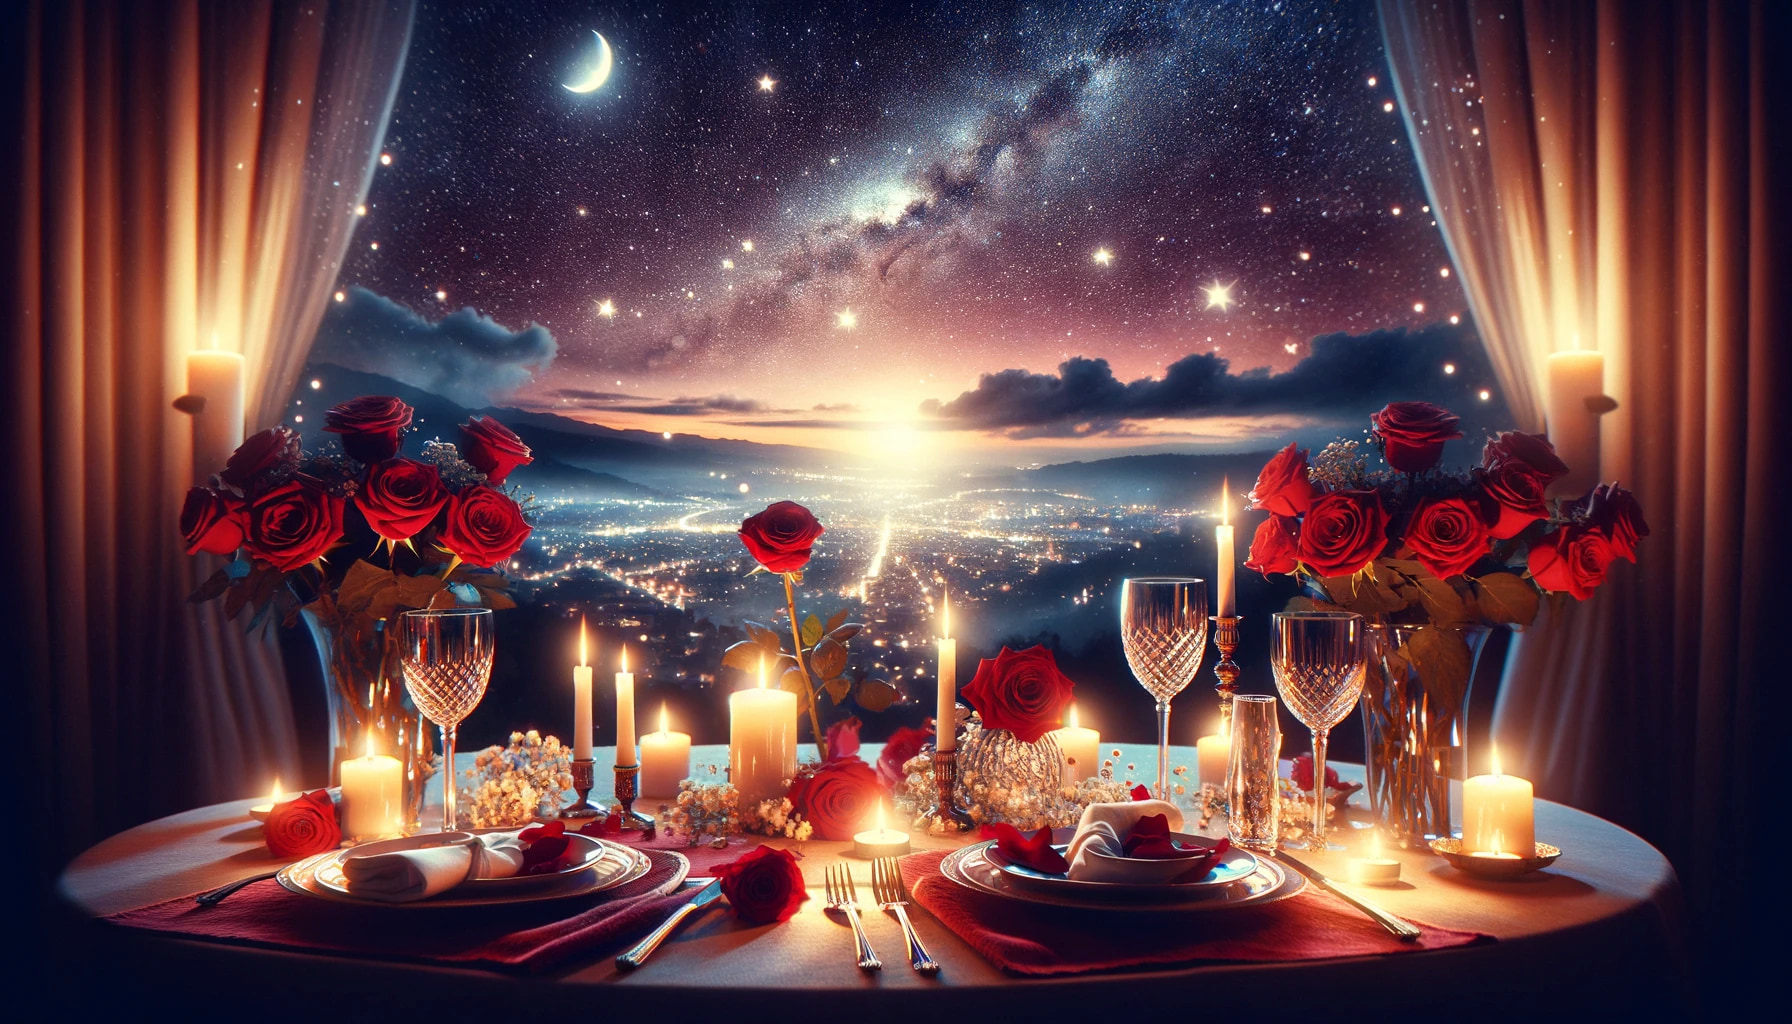 Romantic Valentine's Day scene featuring a candlelit dinner for two, with a stunning view of the night sky filled with stars and the soft glow of city lights in the distance. The table is elegantly set with red roses, fine china, and sparkling crystal glasses, creating a warm and intimate atmosphere perfect for celebrating love.